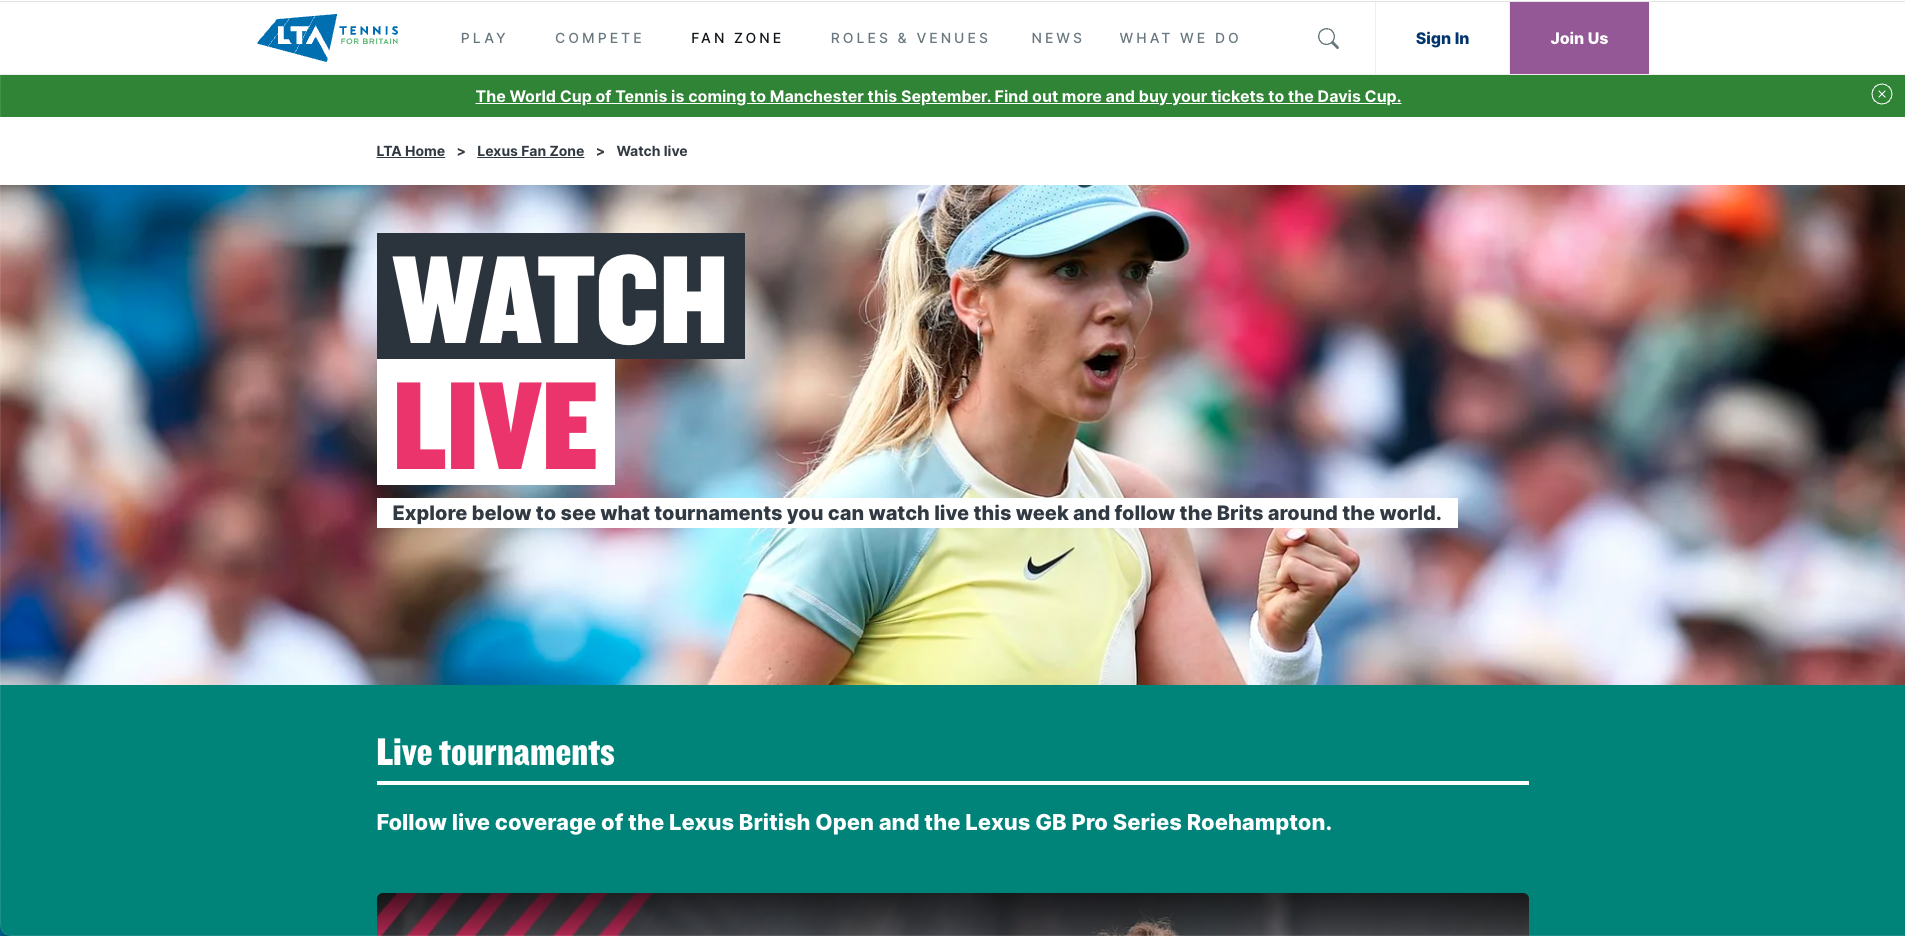 Screenshot of the LTA (Lawn Tennis Association's) website WATCH LIVE page which features live streaming video.